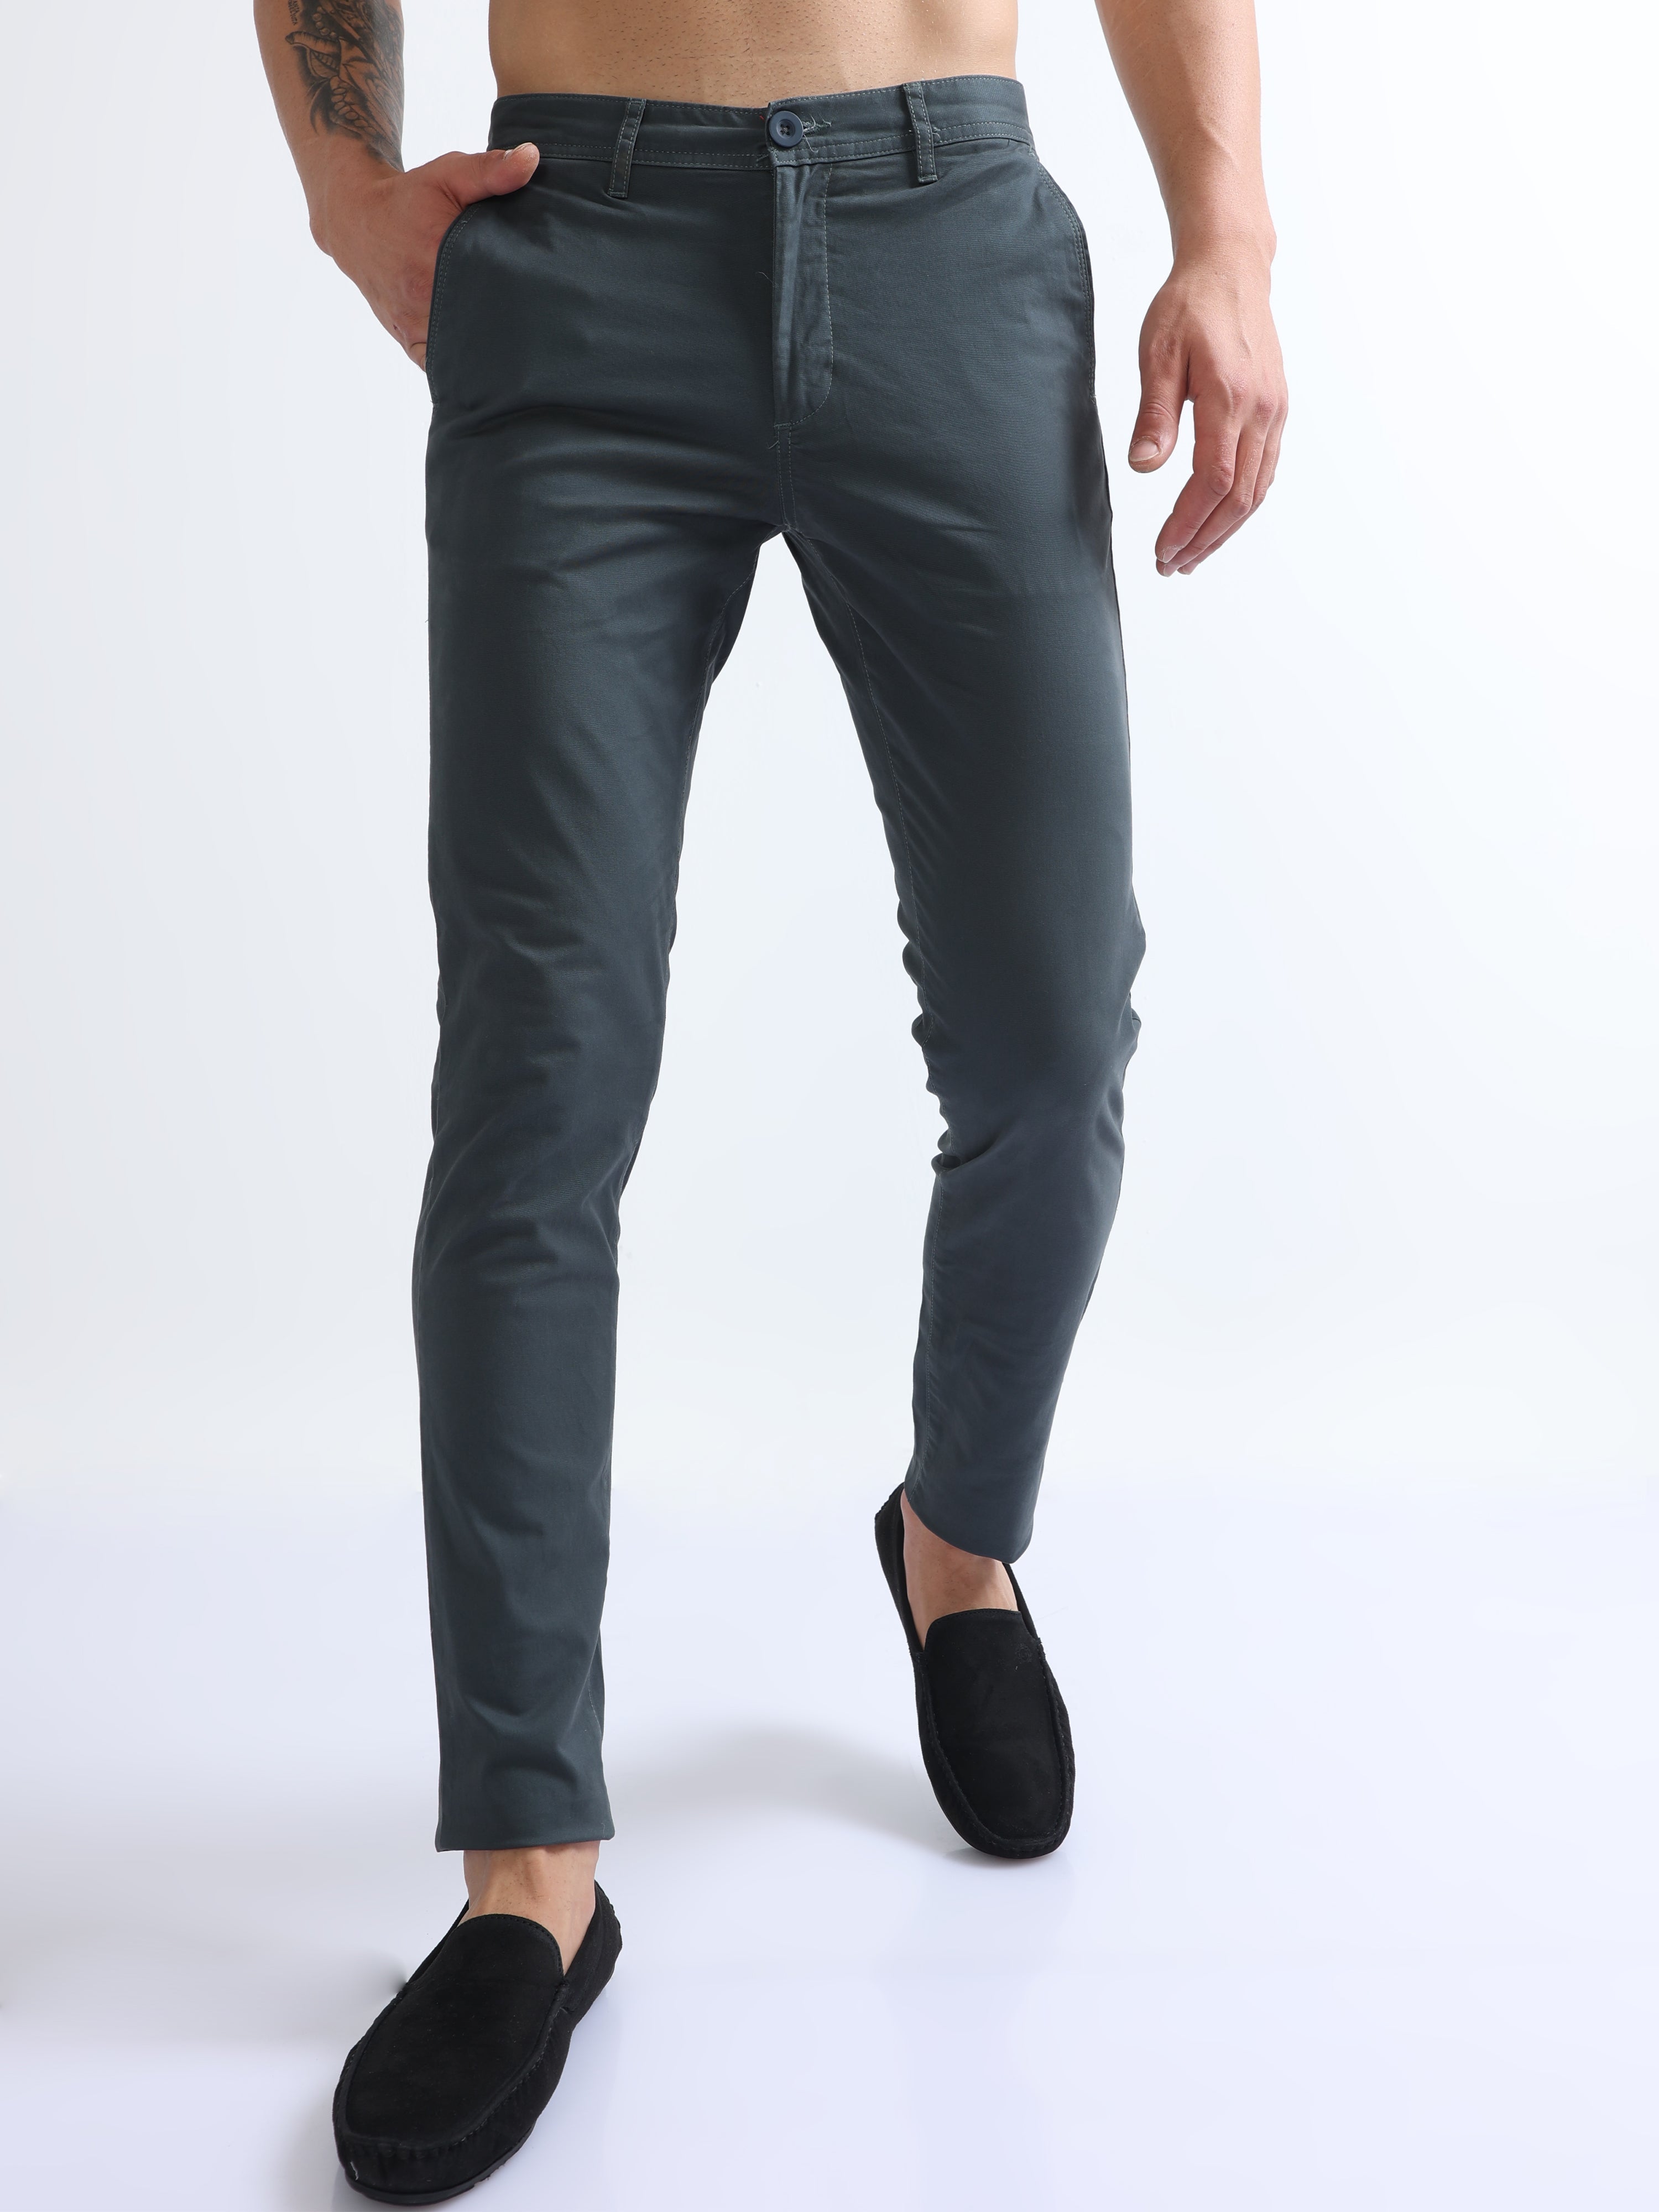 Mens Casual Cotton Denim Mens Skinny Cargo Trousers With Multi Pockets And  Side Pockets Cargo Style Pencil Pants 230519 From Bai01, $23.99 | DHgate.Com